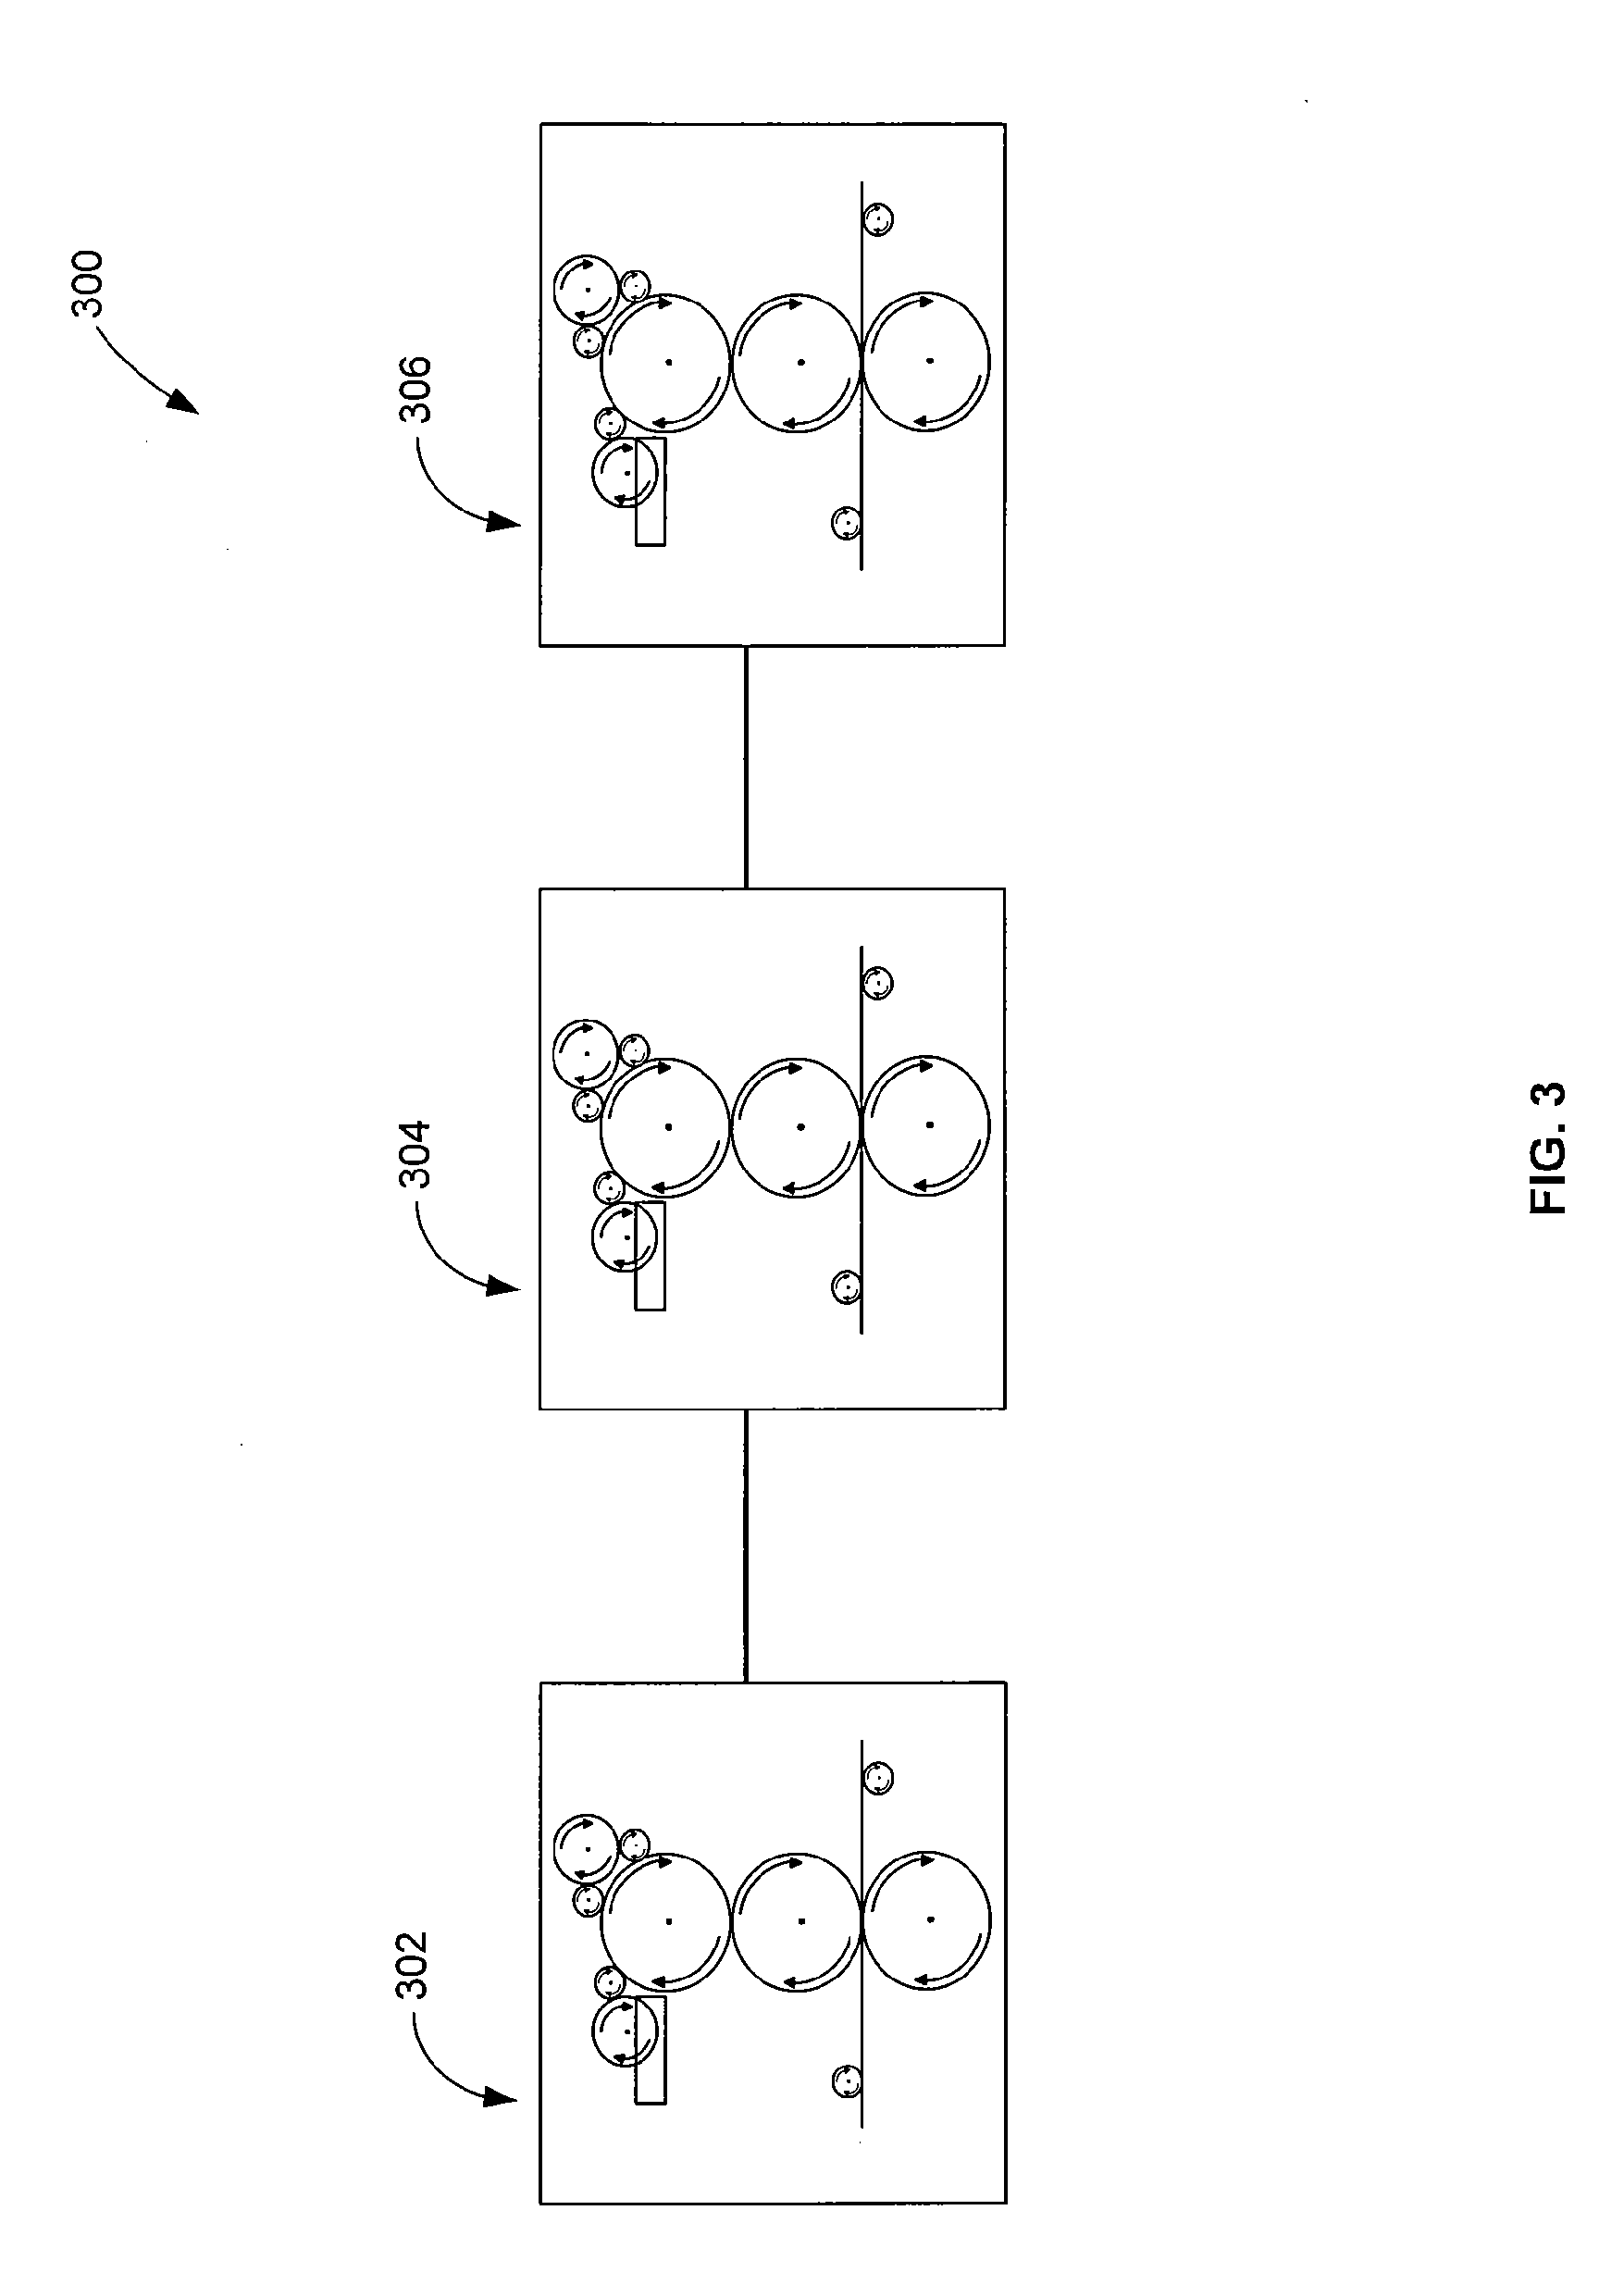 Coating composition, system including the coating composition, and method for secure images